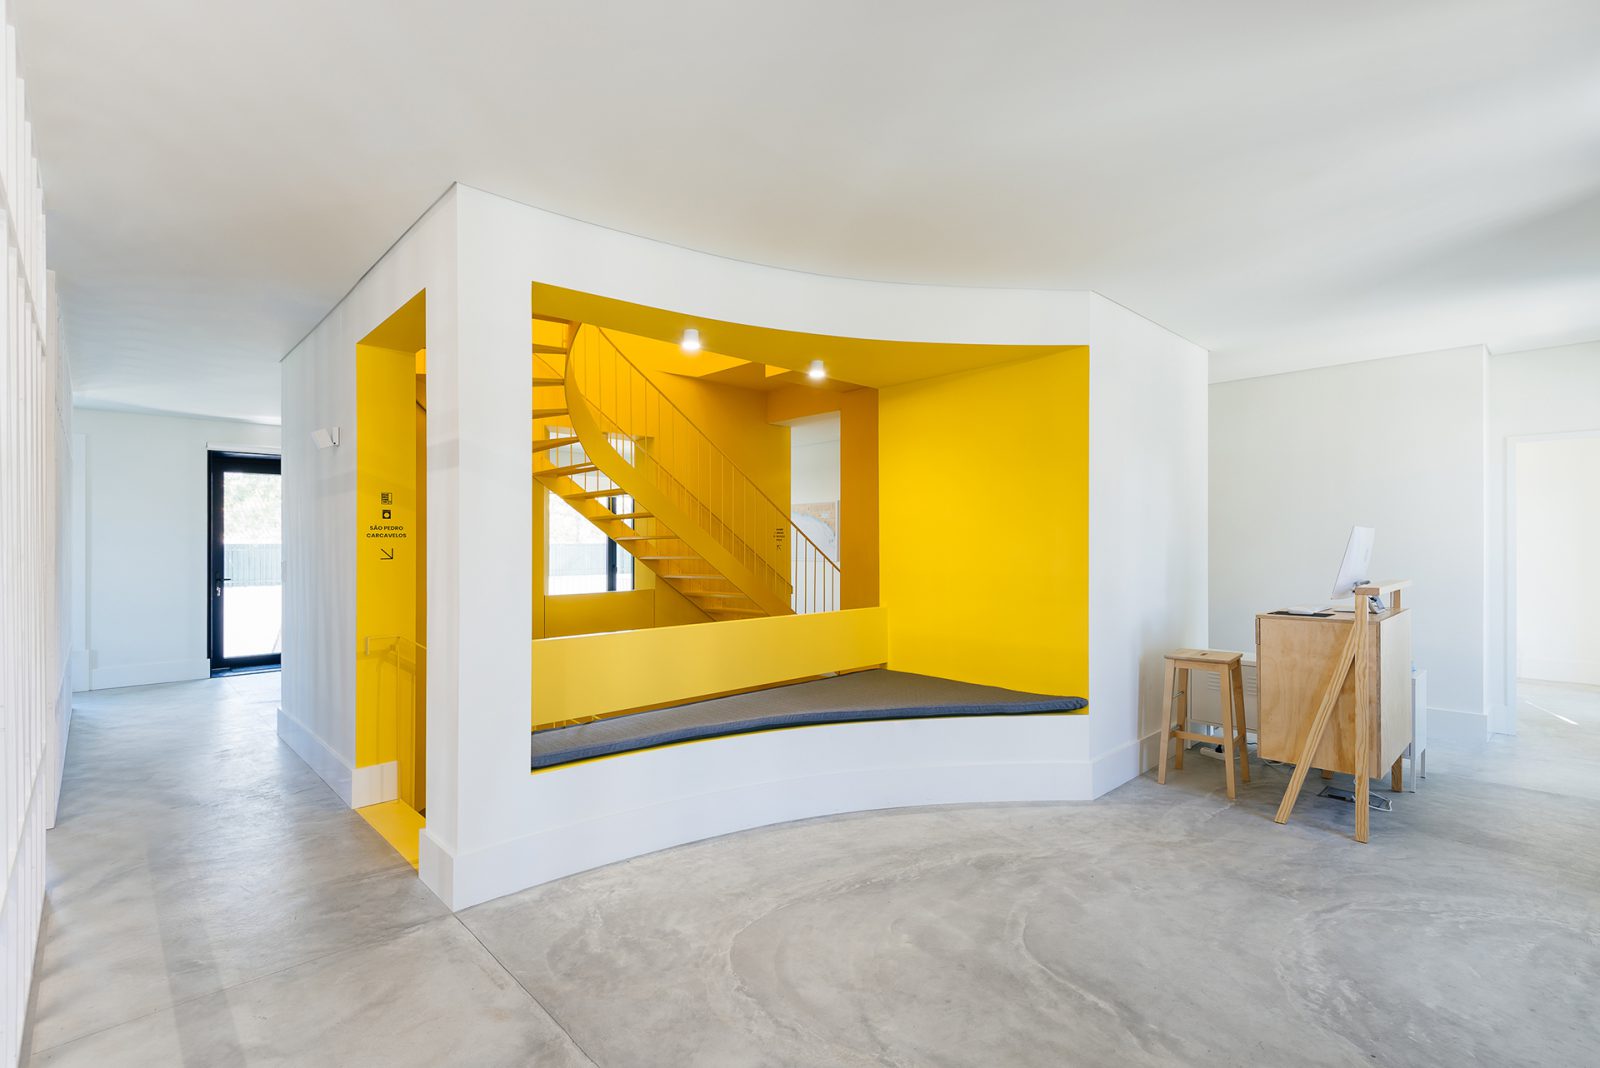 The stairwell is completely yellow with the metal staircase